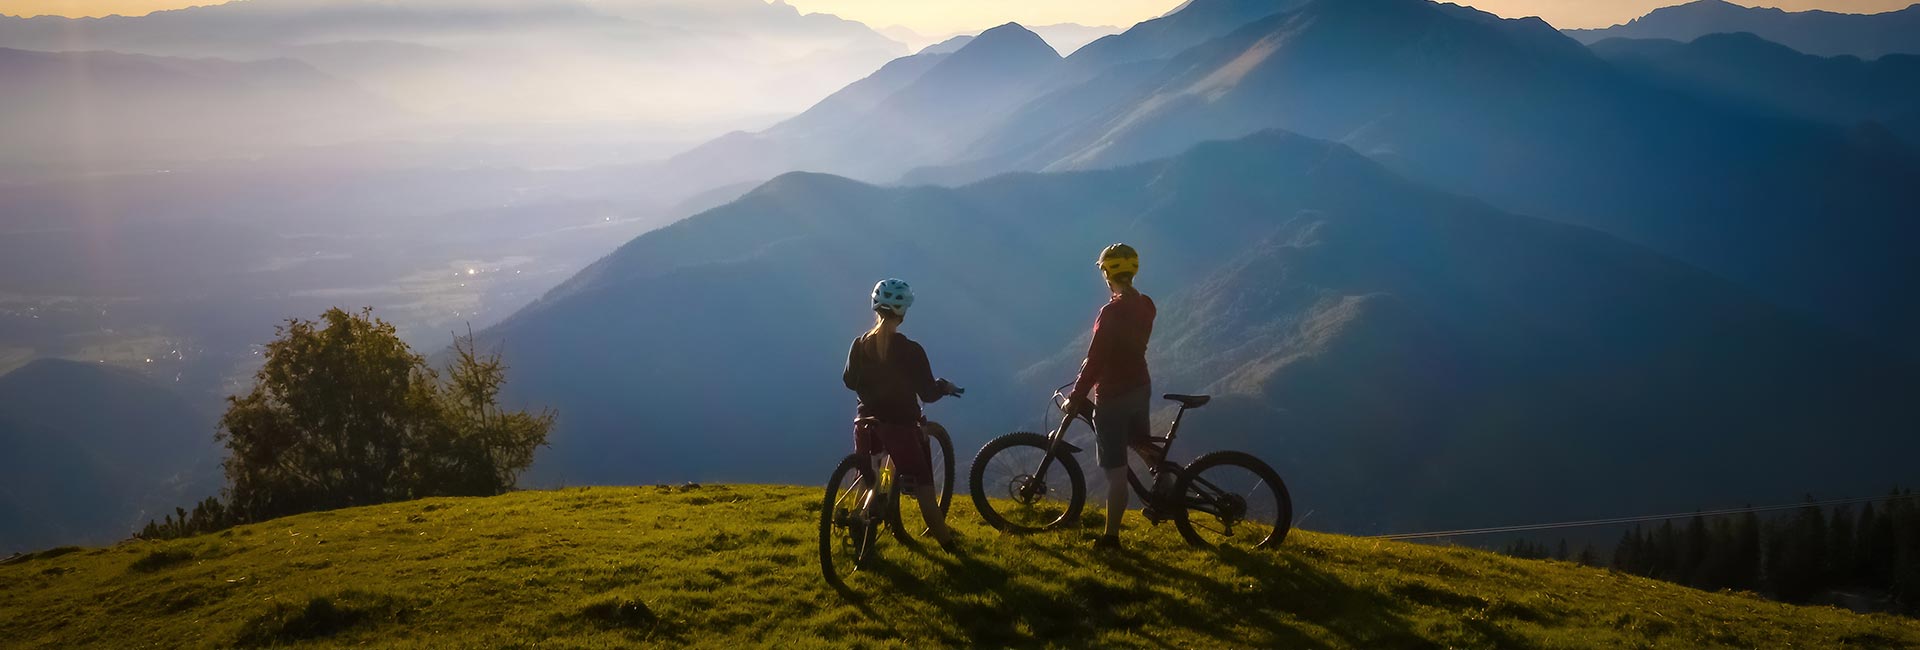 a couple on their mountain bikes a the top of a hill taking in the vast landscape view